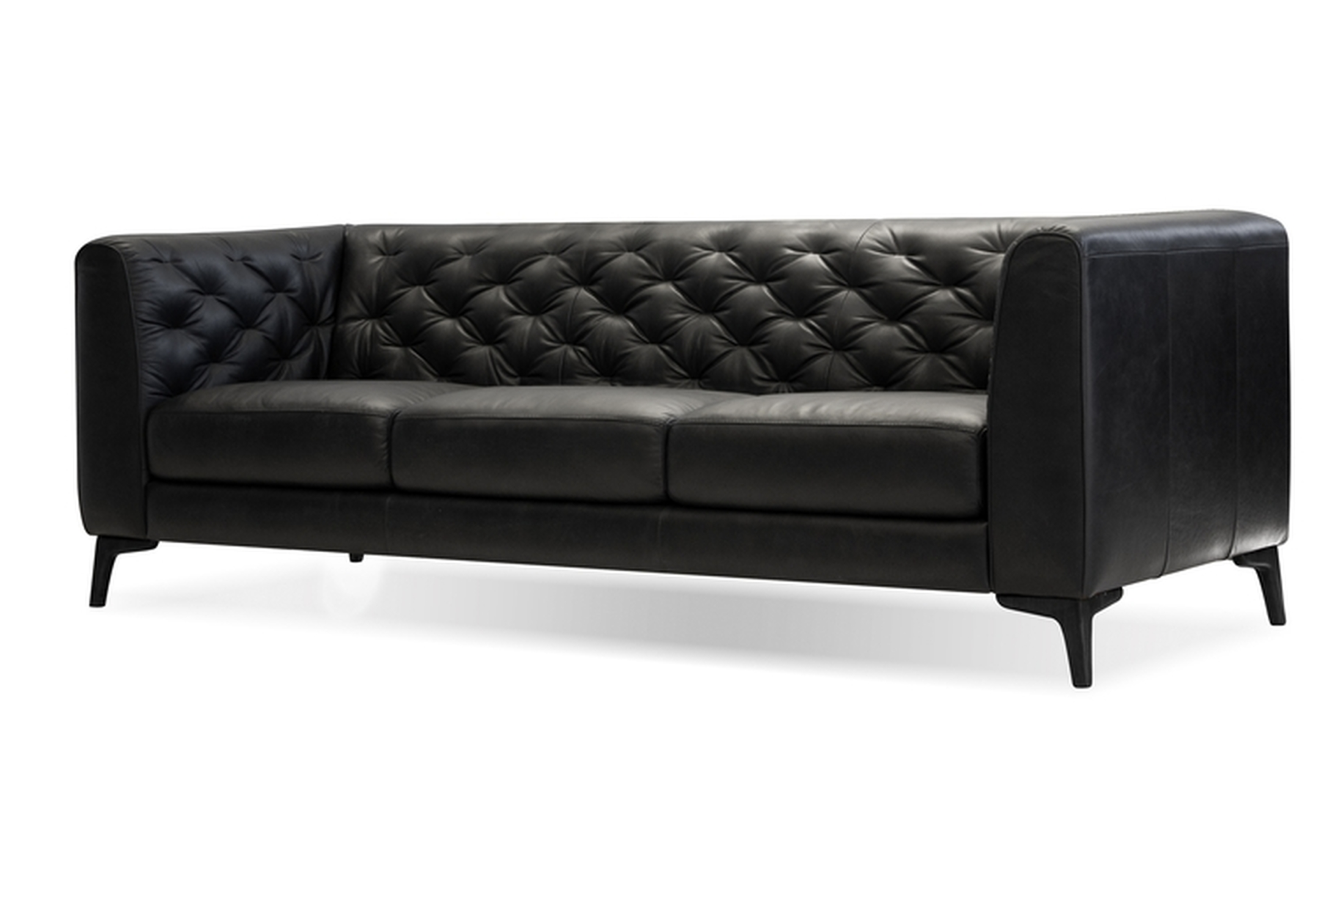 Black Leather Tufted Sofa Please, Black Leather Tufted Couch